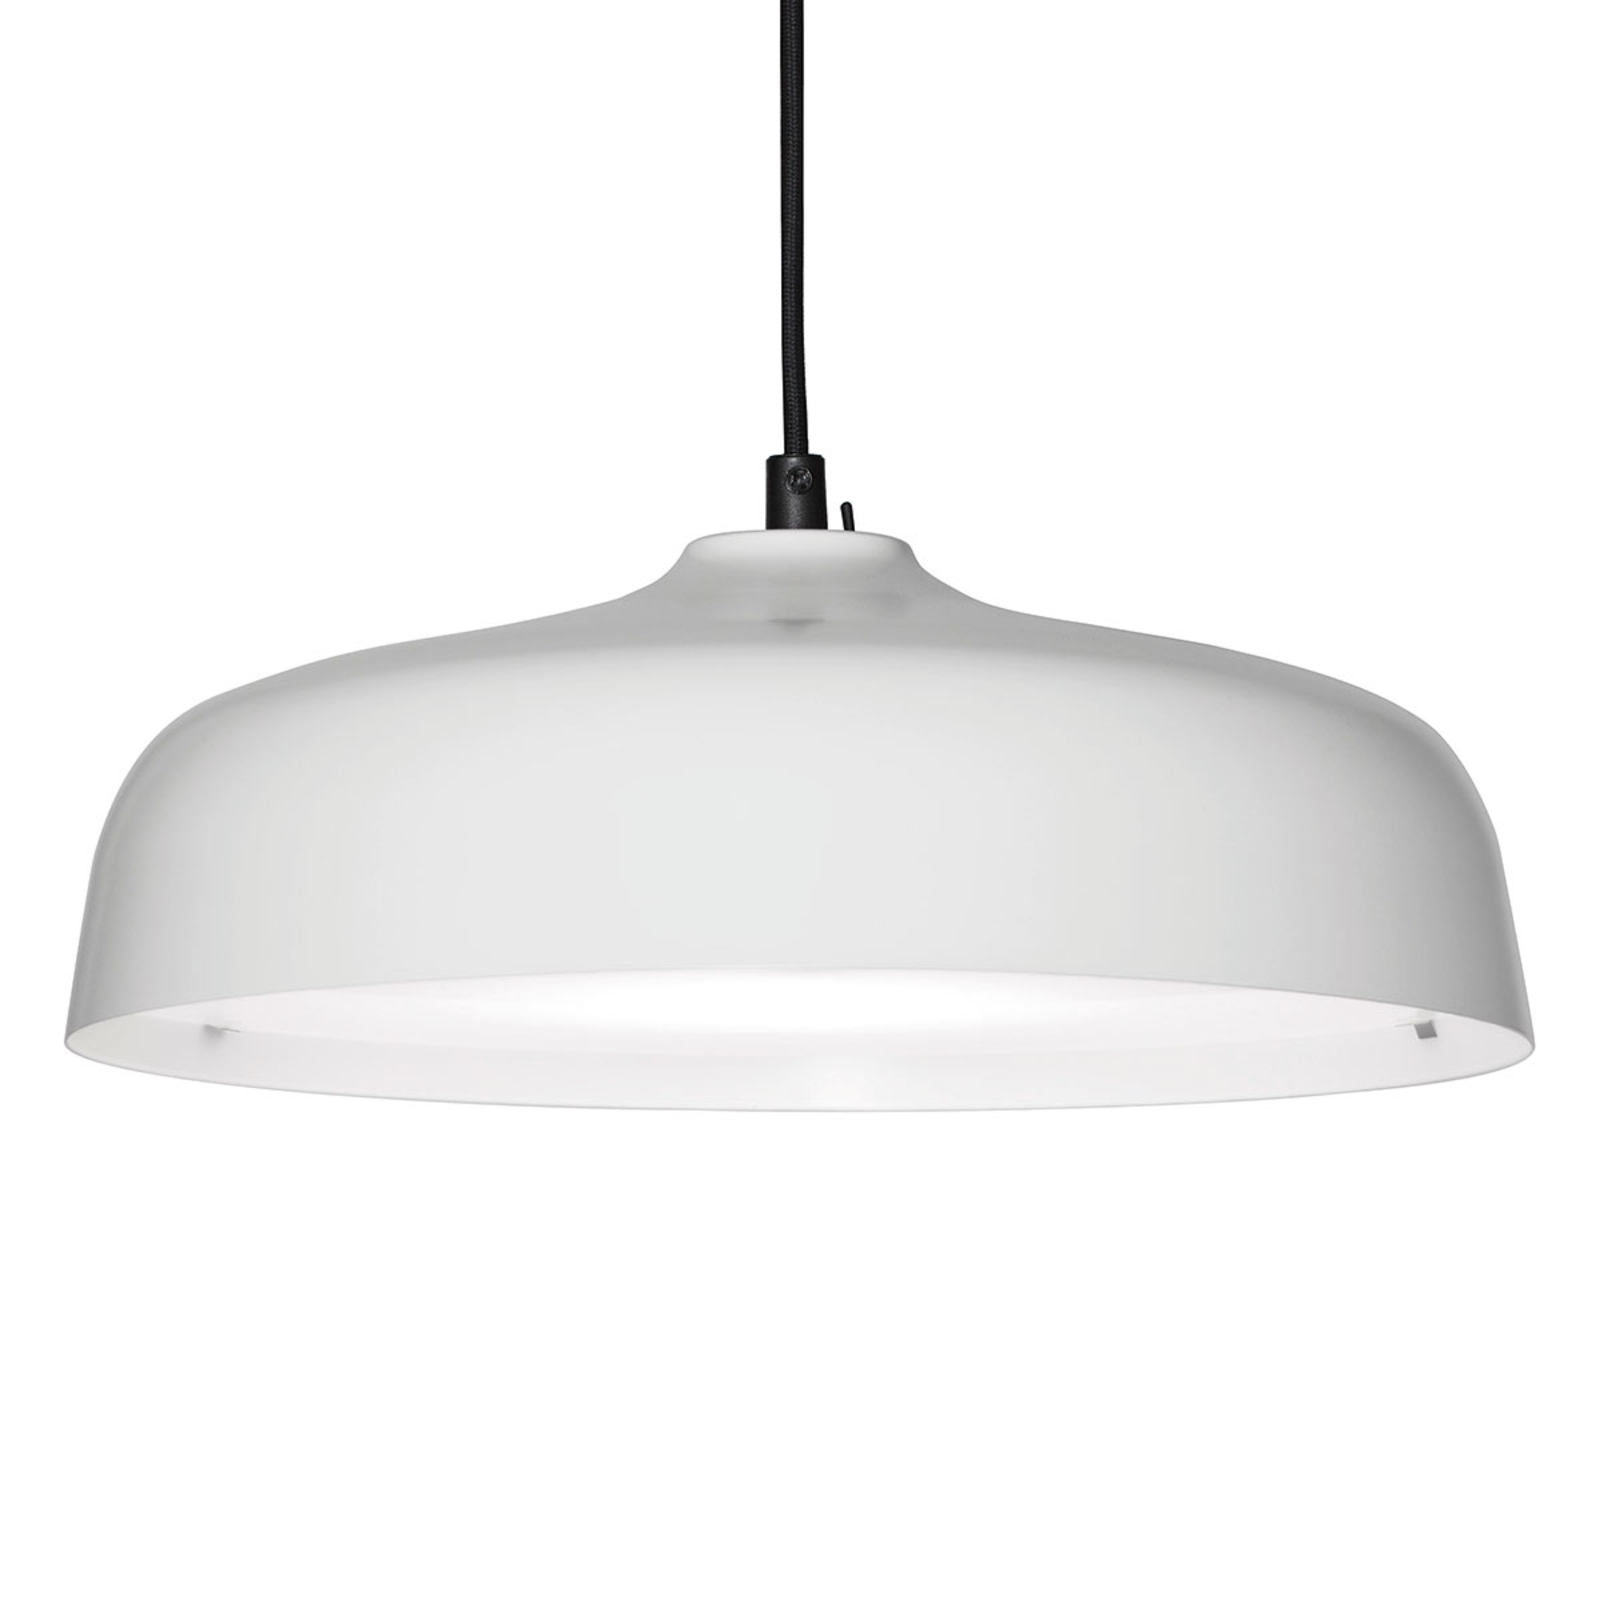 Innolux Candeo Air LED pendant light white